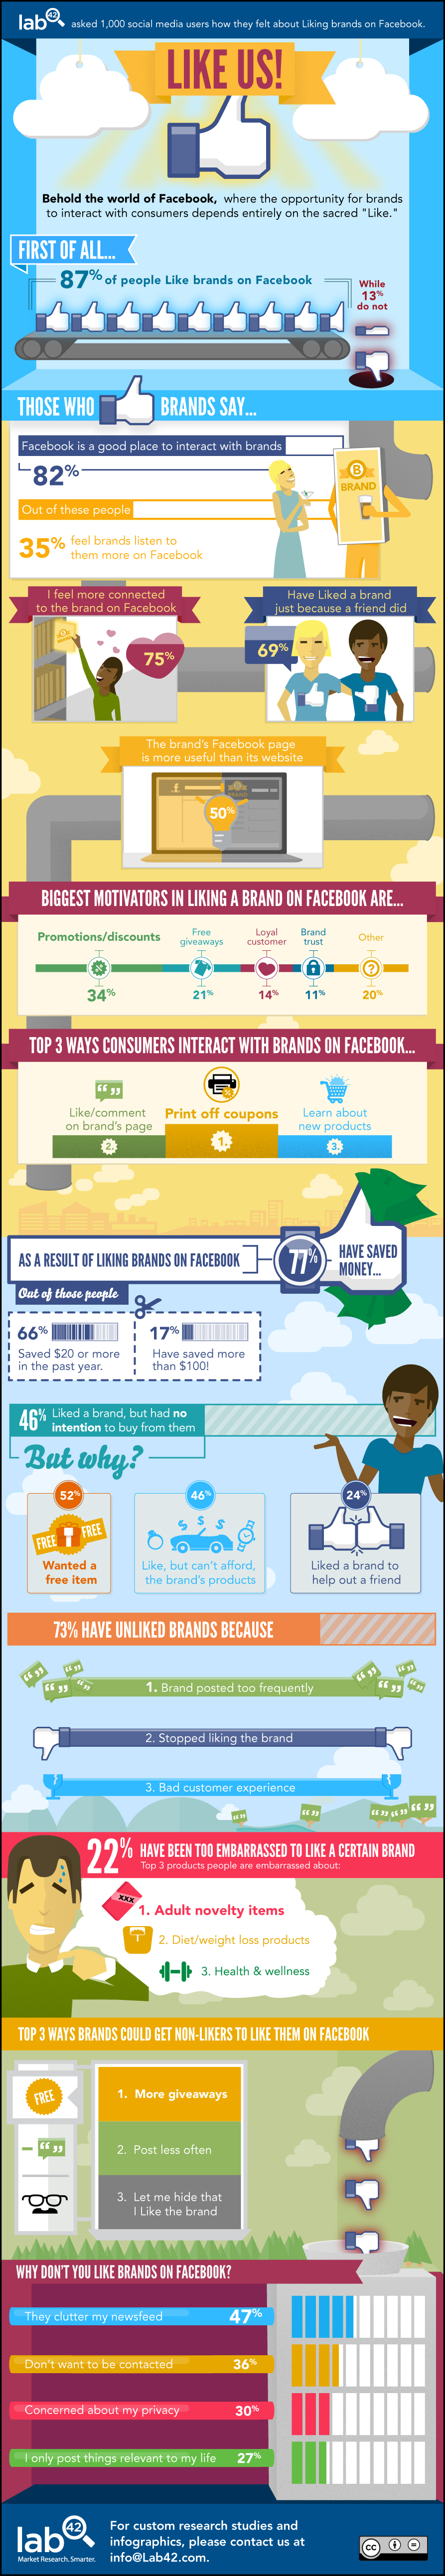 facebook infographic - What do Facebook Likes Really Mean for Your Business?